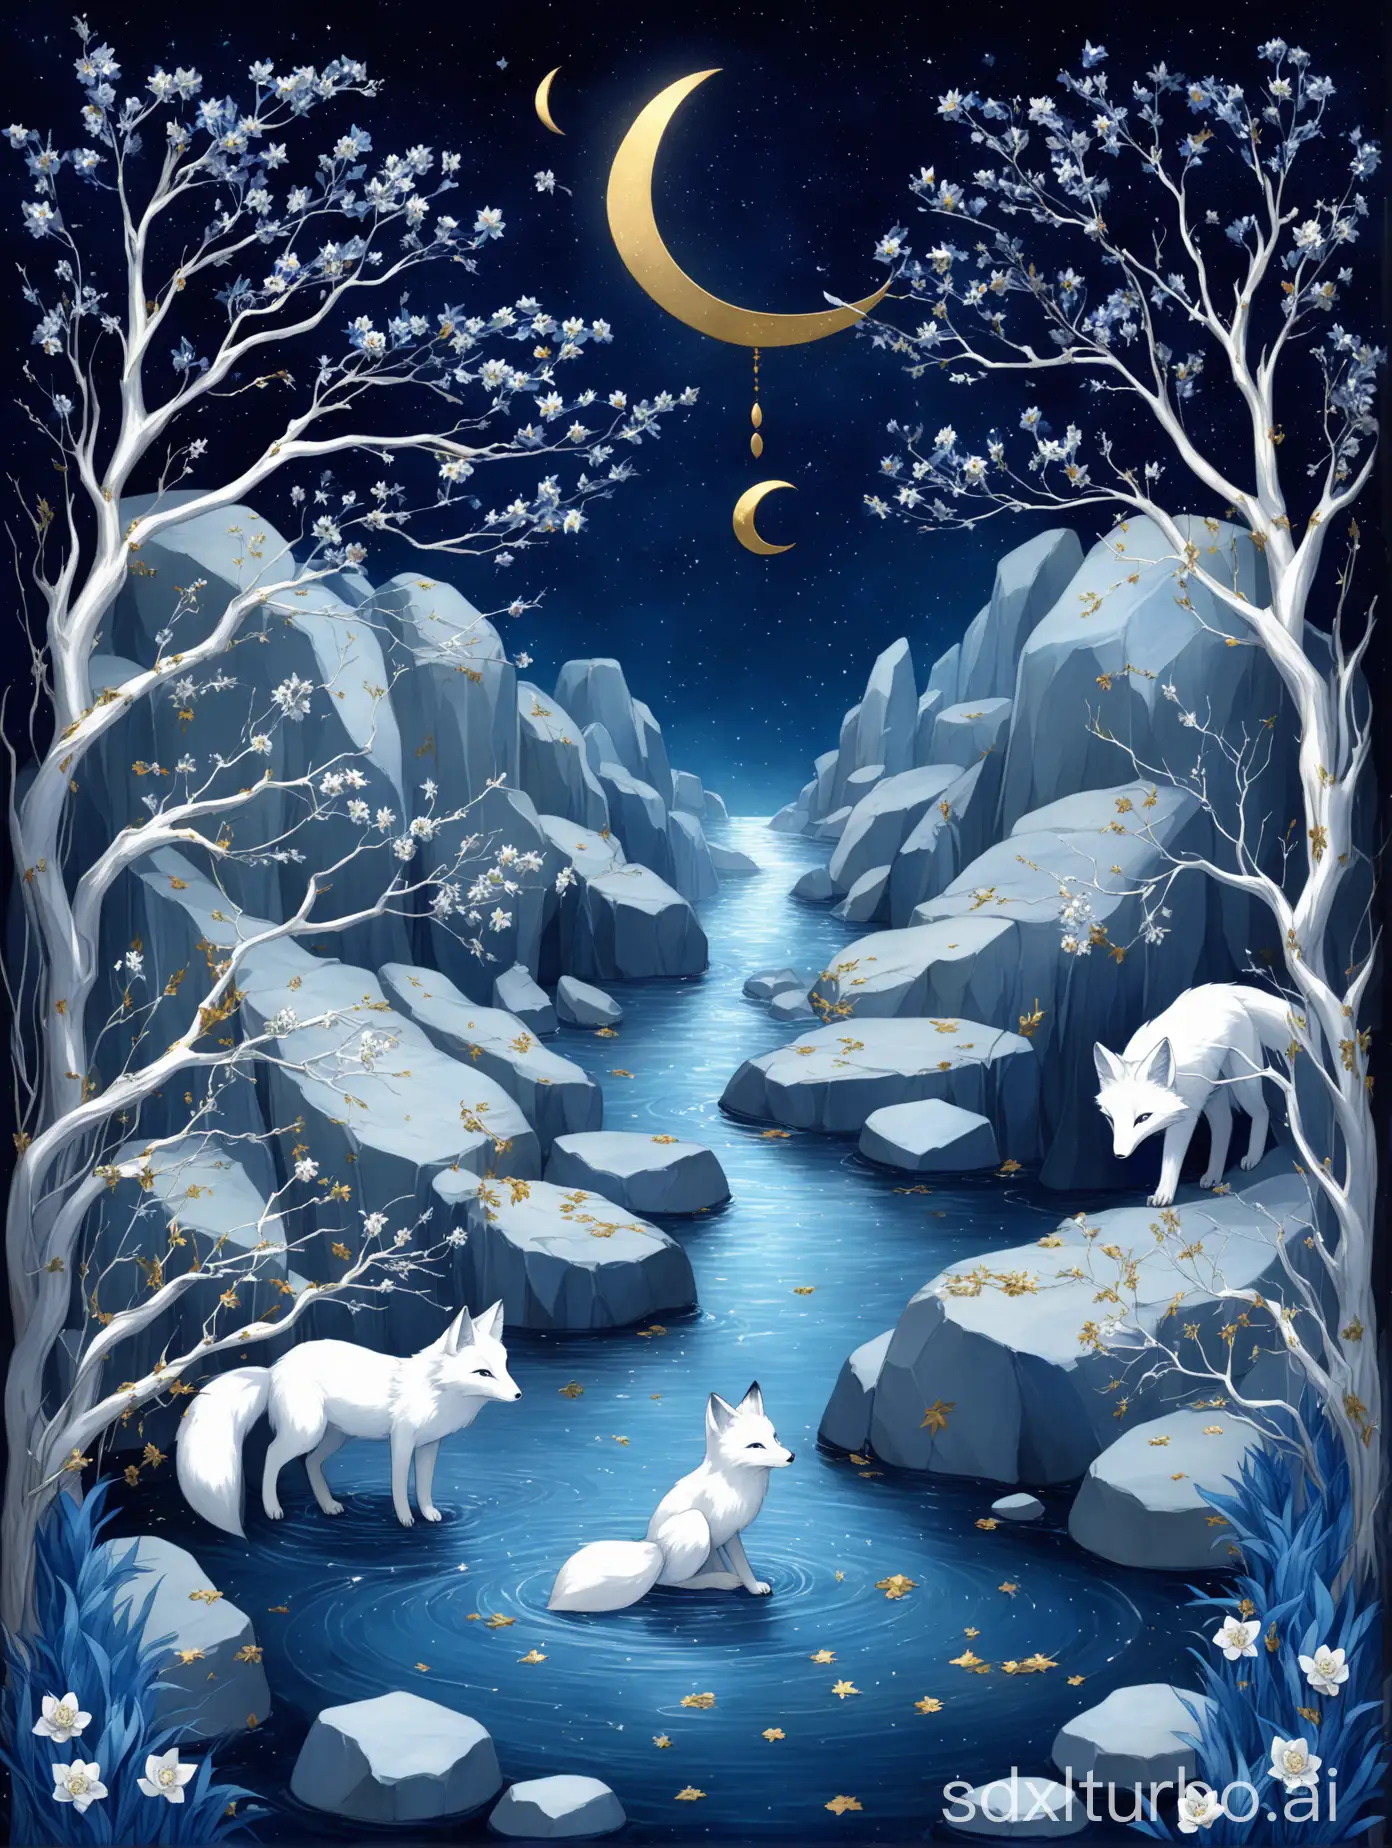 The backdrop is a deep blue starry sky with a small golden crescent moon.nOn either side are long branches of blue leaves, and scattered among them are silver flowers.nIn the middle is flowing water, with faintly discernible rocks beneath it.nIn the bottom right corner is a white fox with a long tail.